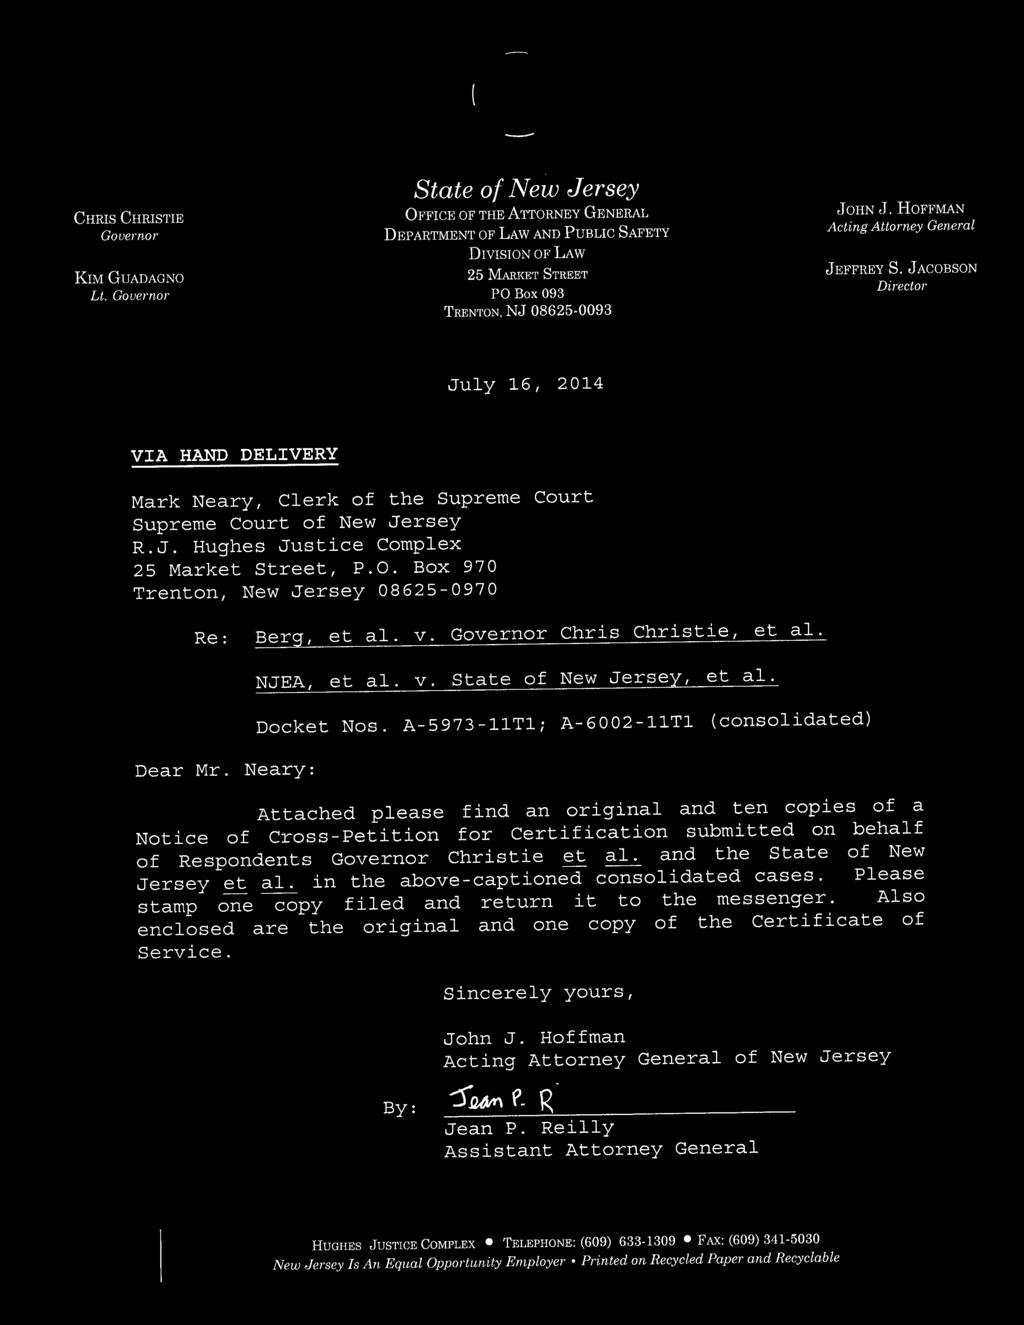 etacobson Director July 16, 2014 VIA HAND DELIVERY Mark Neary, Clerk of the Supreme Court Supreme Court of New Jersey 25 Market Street, P.O. Box 970 Trenton, New Jersey 08625-0970 Re: Berg, et al. v.